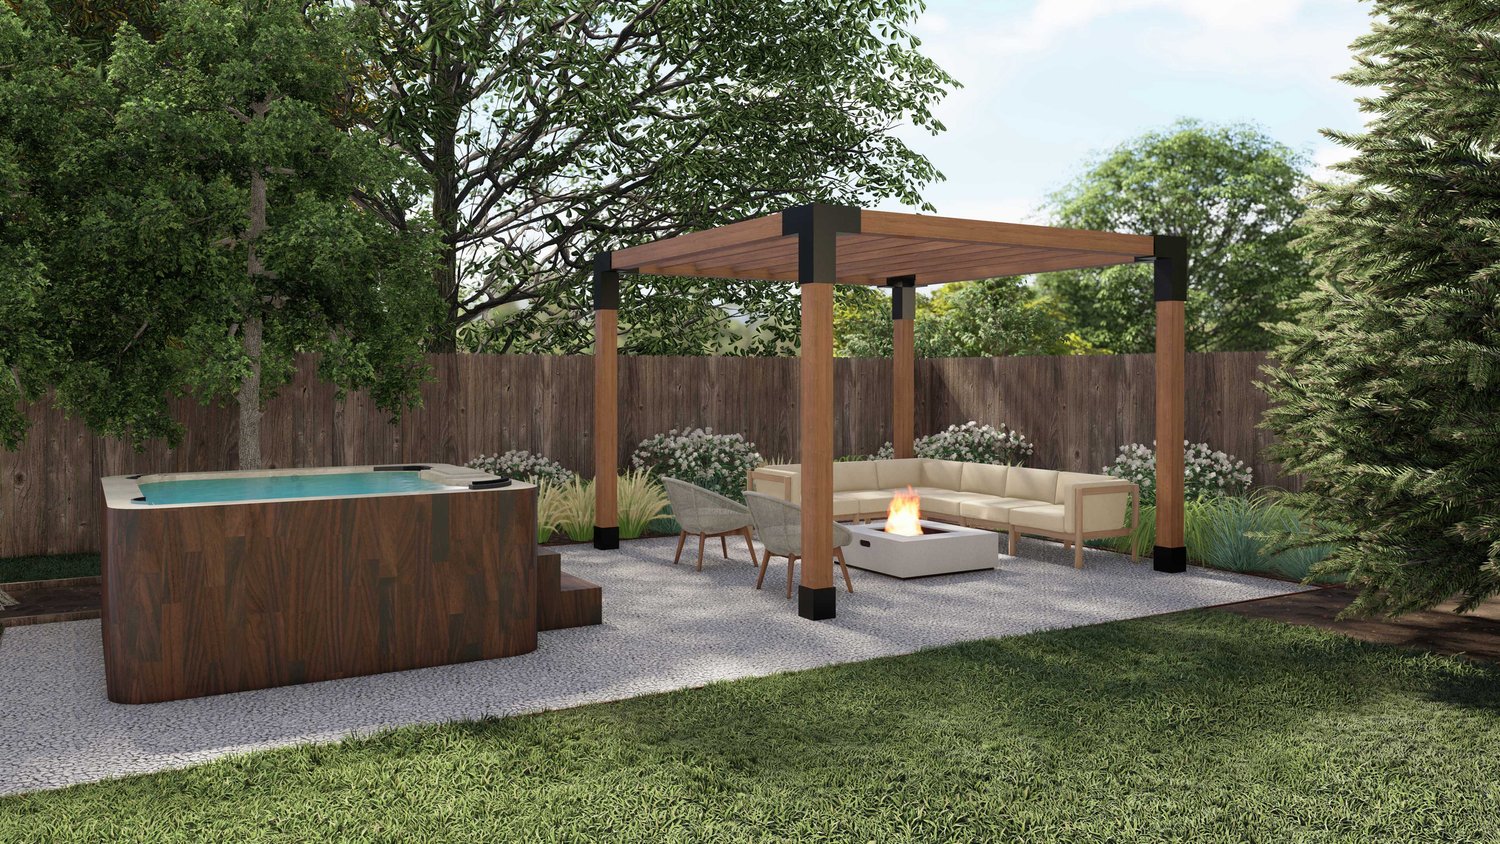 Denver backyard with a sitting area, pergola and fire pit